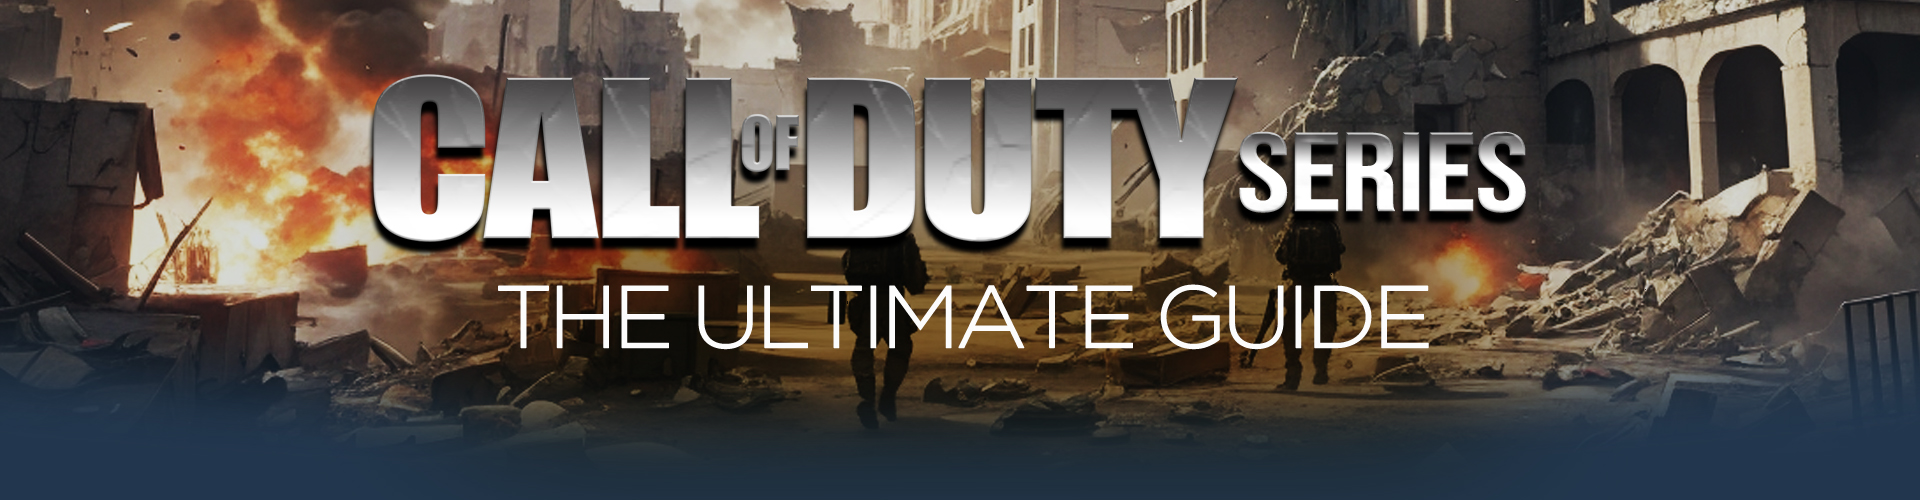 Call of Duty Serie: Legacy of a War Games Franchise